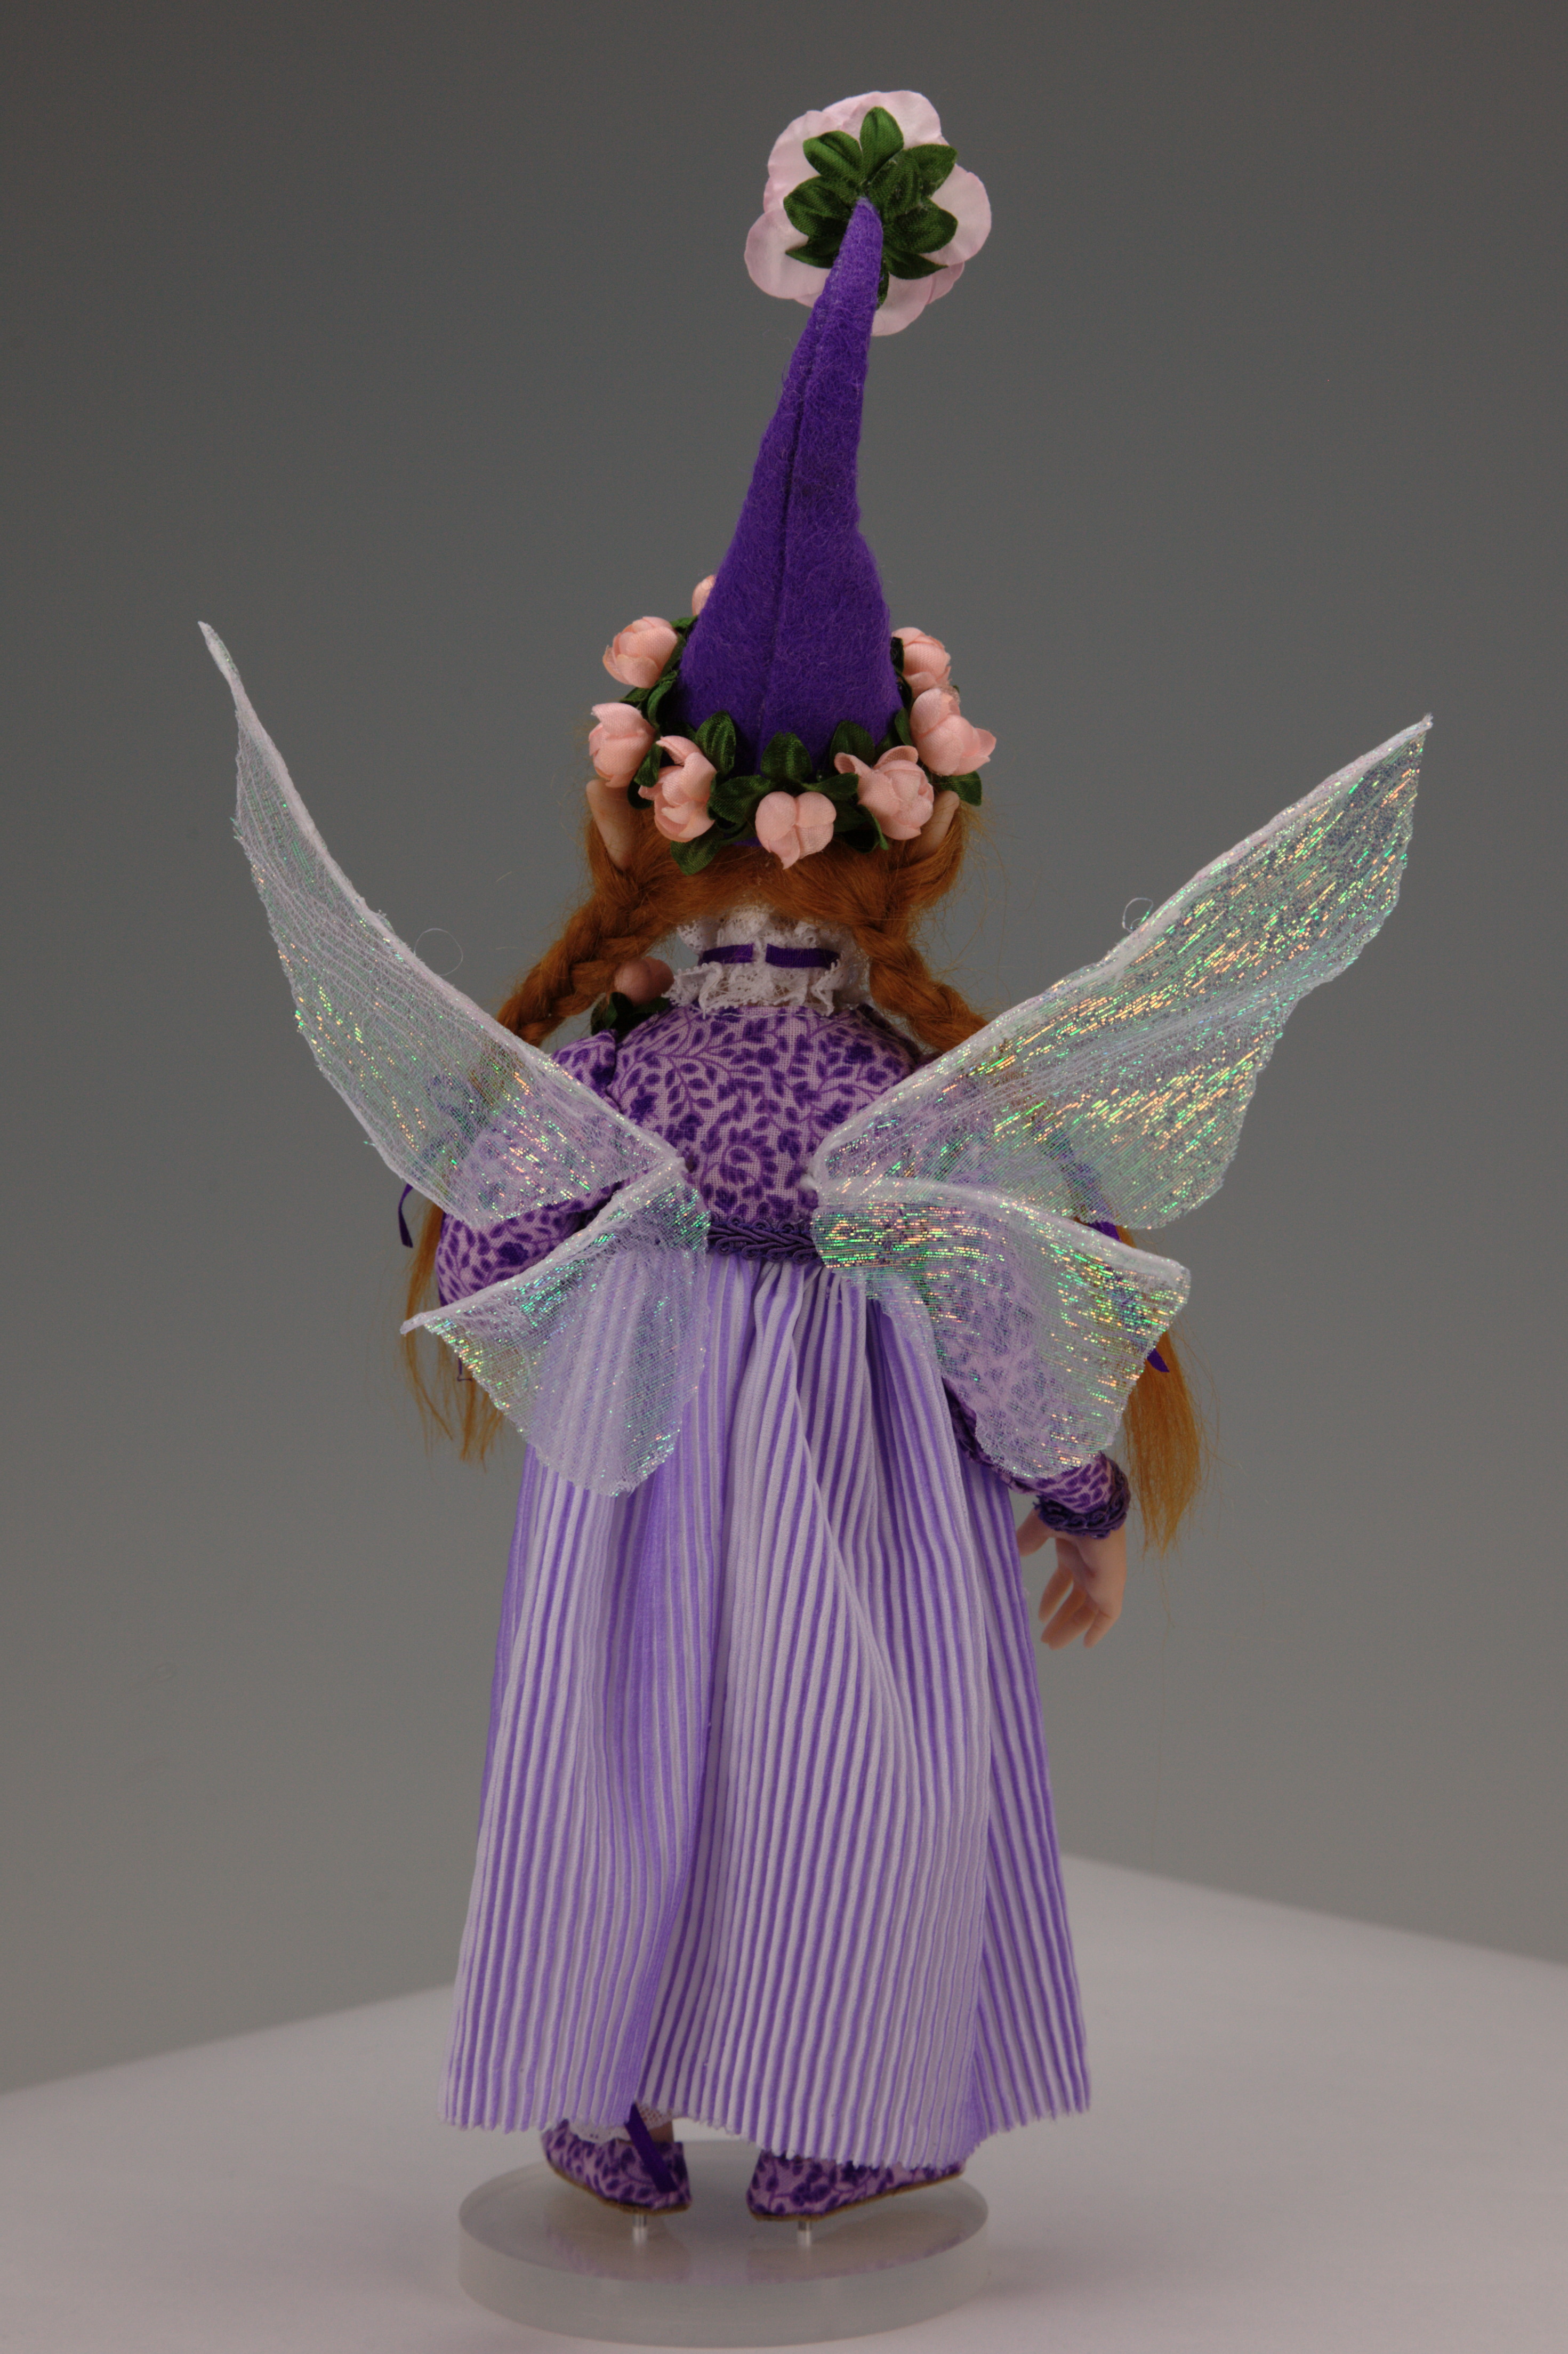 Petal - One-Of-A-Kind Doll by Tanya Abaimova. Creatures Gallery 